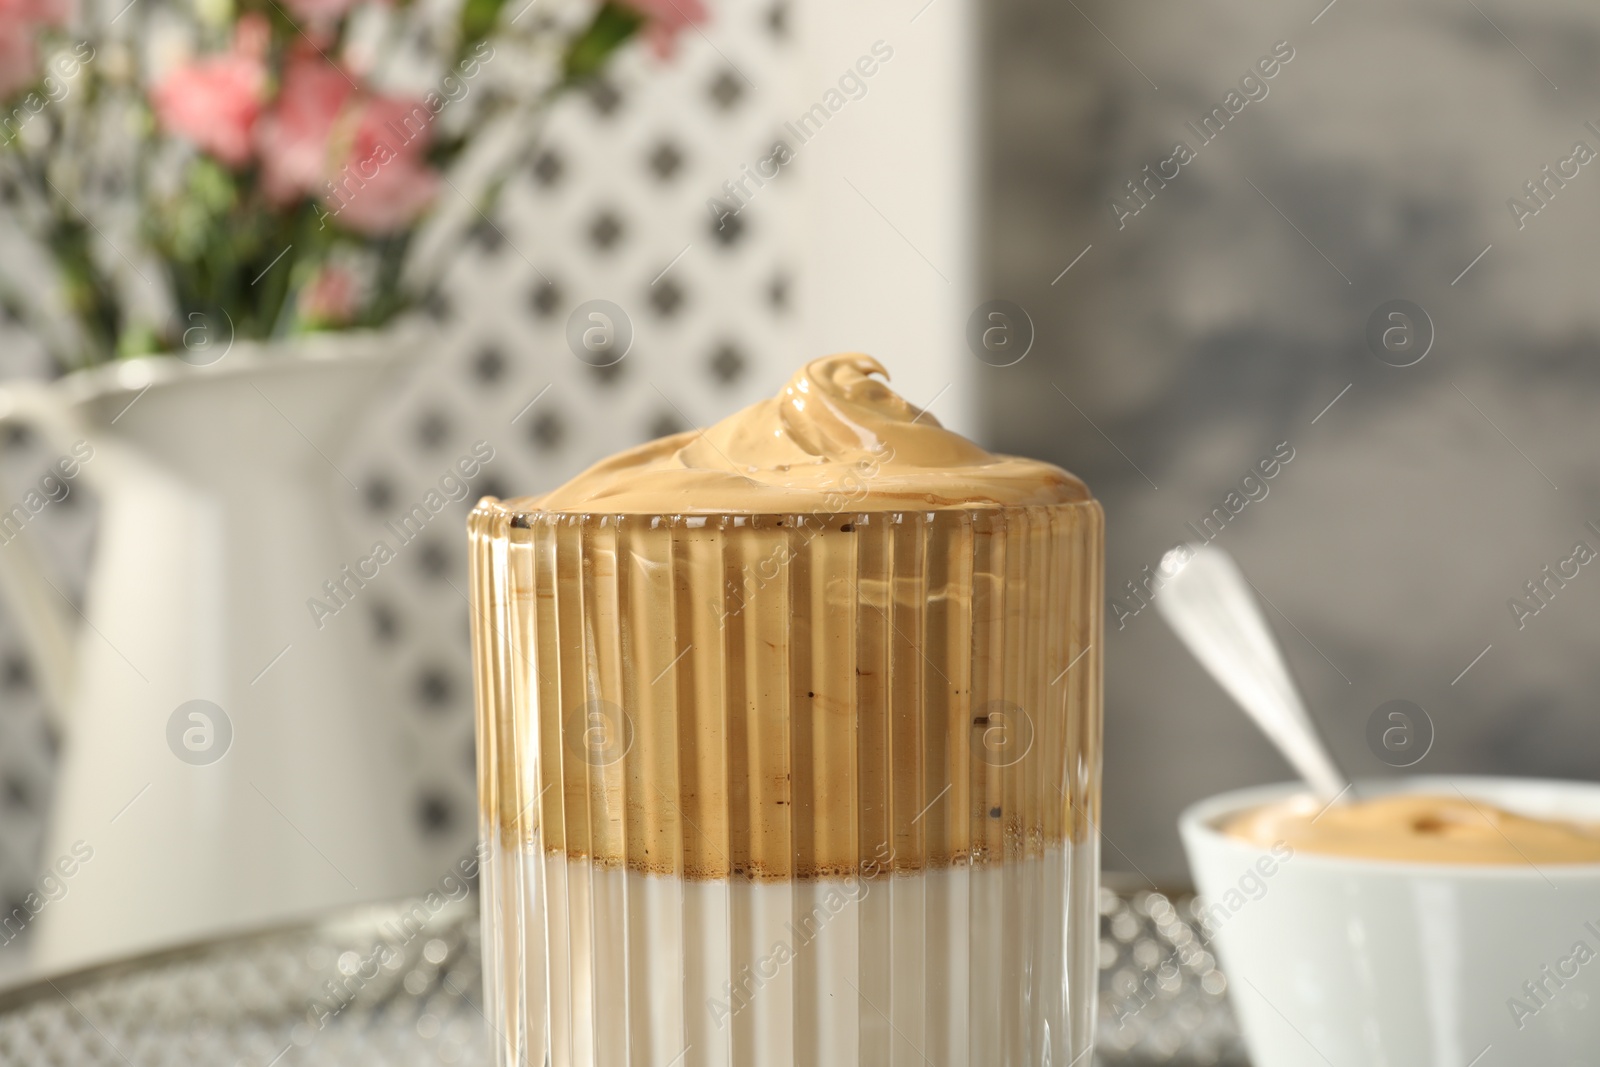 Photo of Glass of delicious dalgona coffee against blurred background, closeup